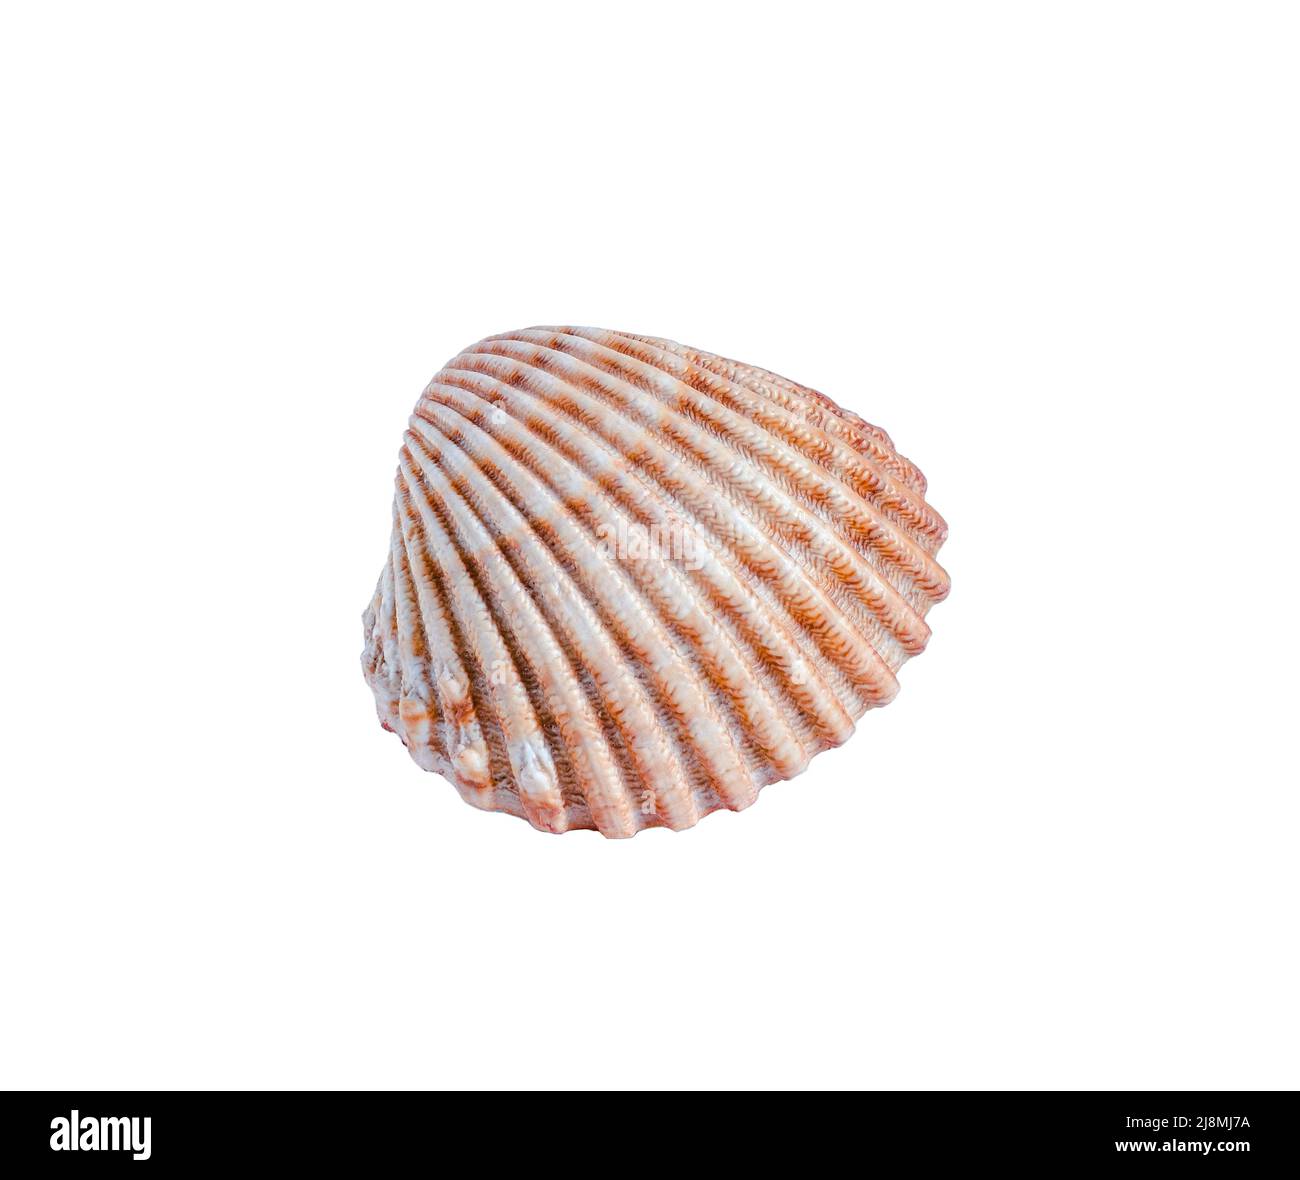 Seashell isolated on white background. Close-up view Stock Photo